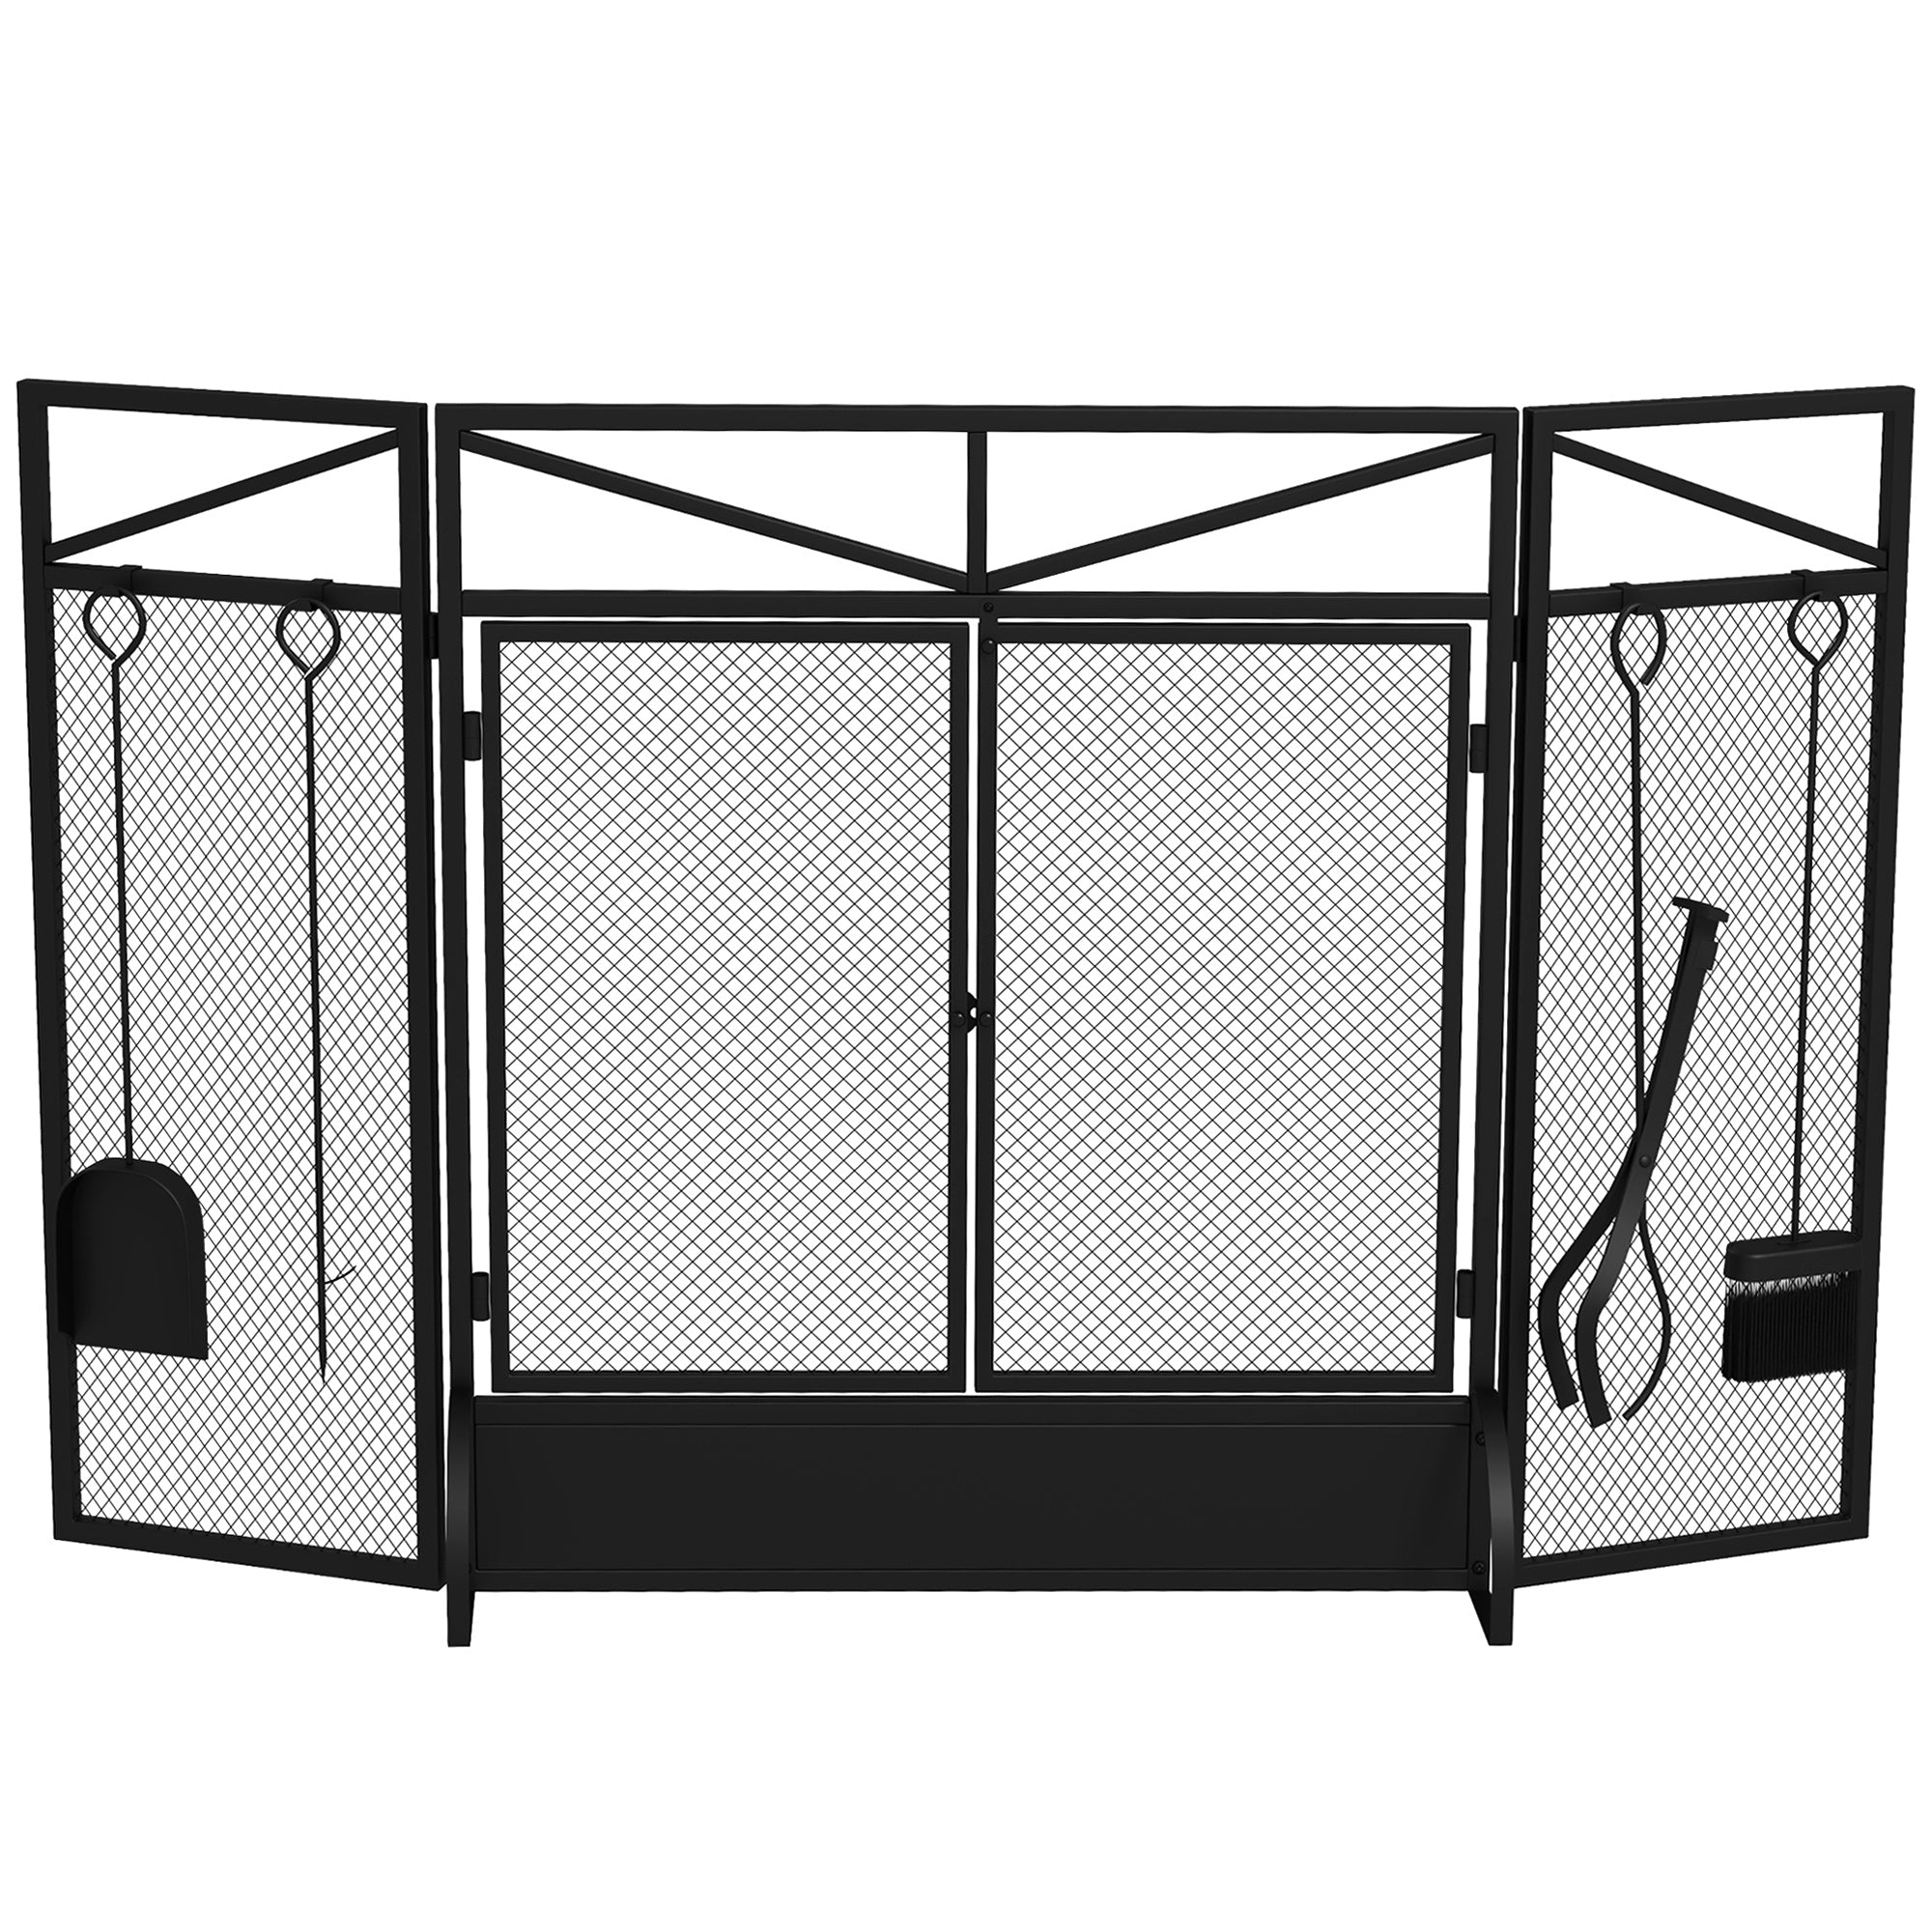 HOMCOM 3 Panel Folding Fire Guard Screen with Fireplace Tool Sets and Front Doors - Freestanding Fire Screen Spark Guard with Feet for Open Fire - Log